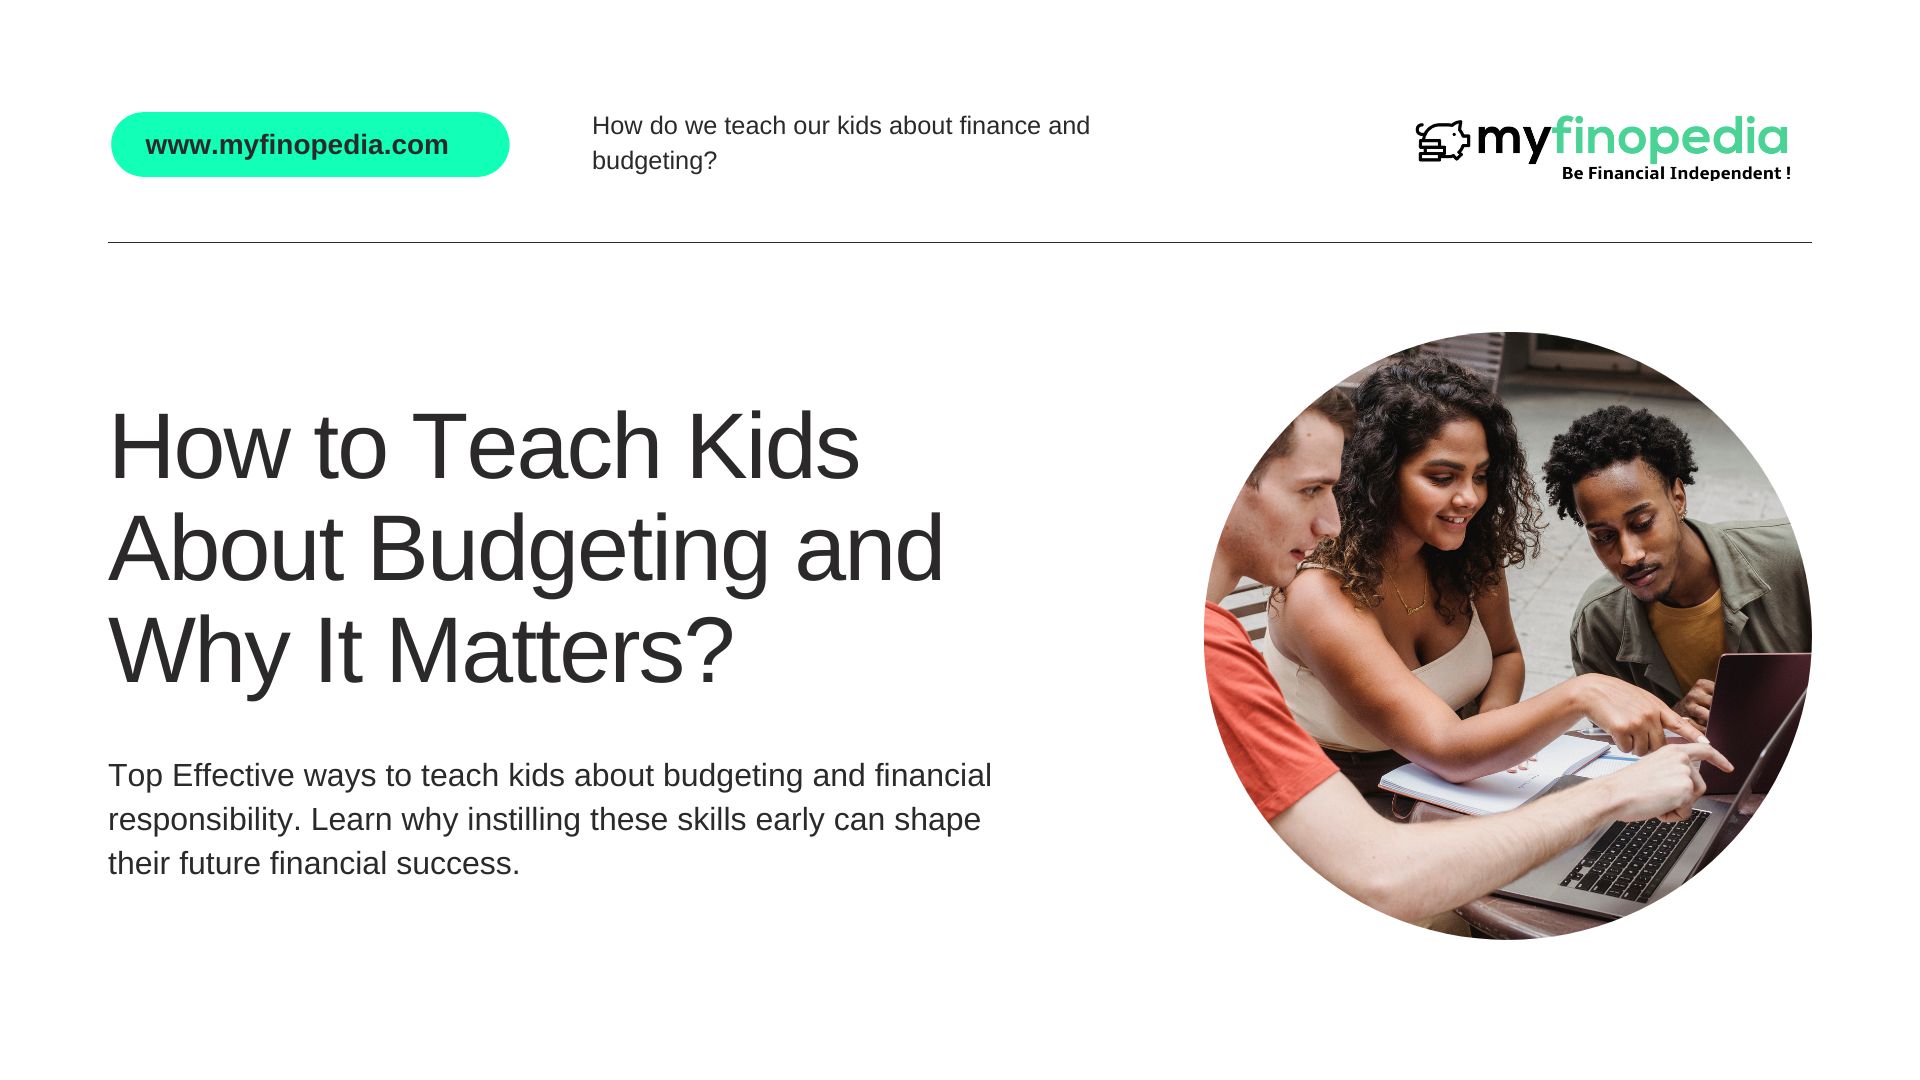 Teach Kids About Budgeting